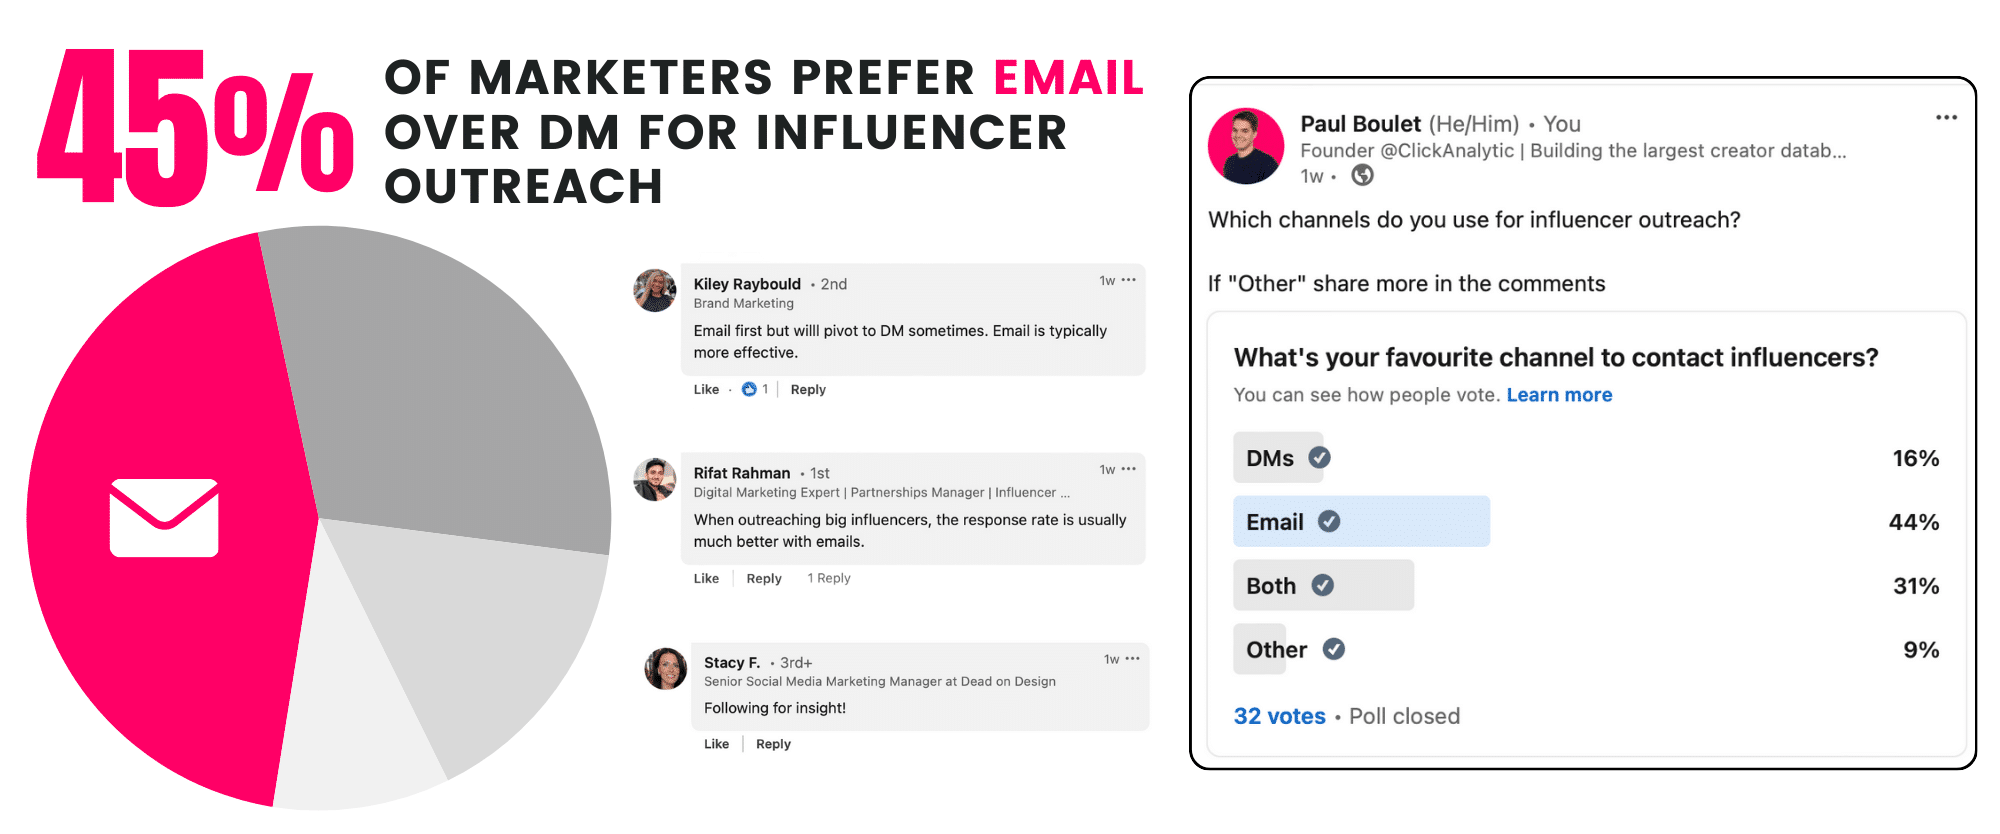 Infographic showing that 45% of marketers prefer email for influencer outreach, with a pie chart breakdown and a mock-up of a social media poll.